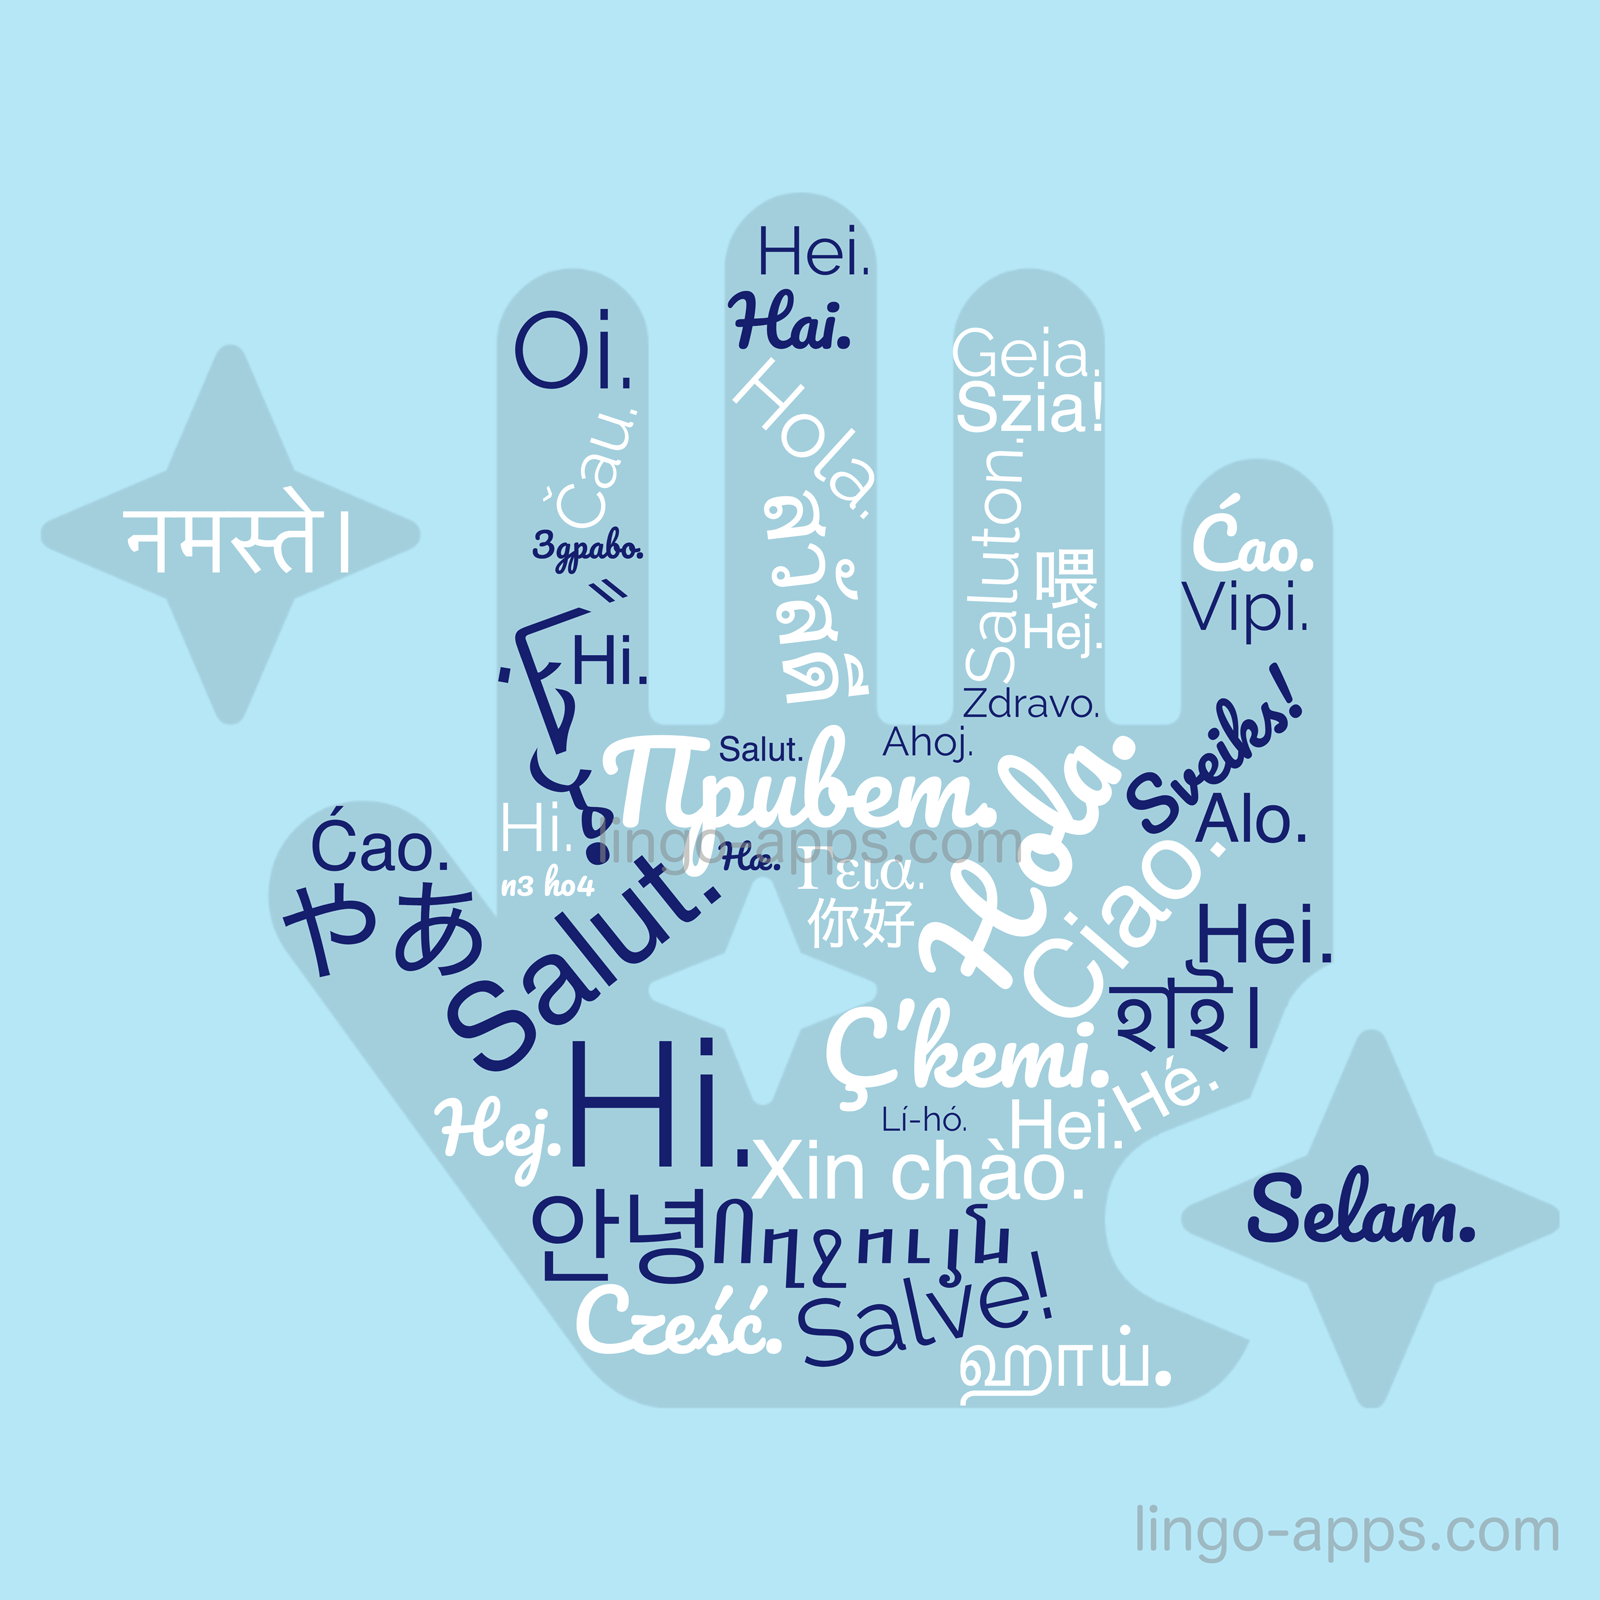 Hello in Different Languages: 113 Distinct Ways to Say Hi